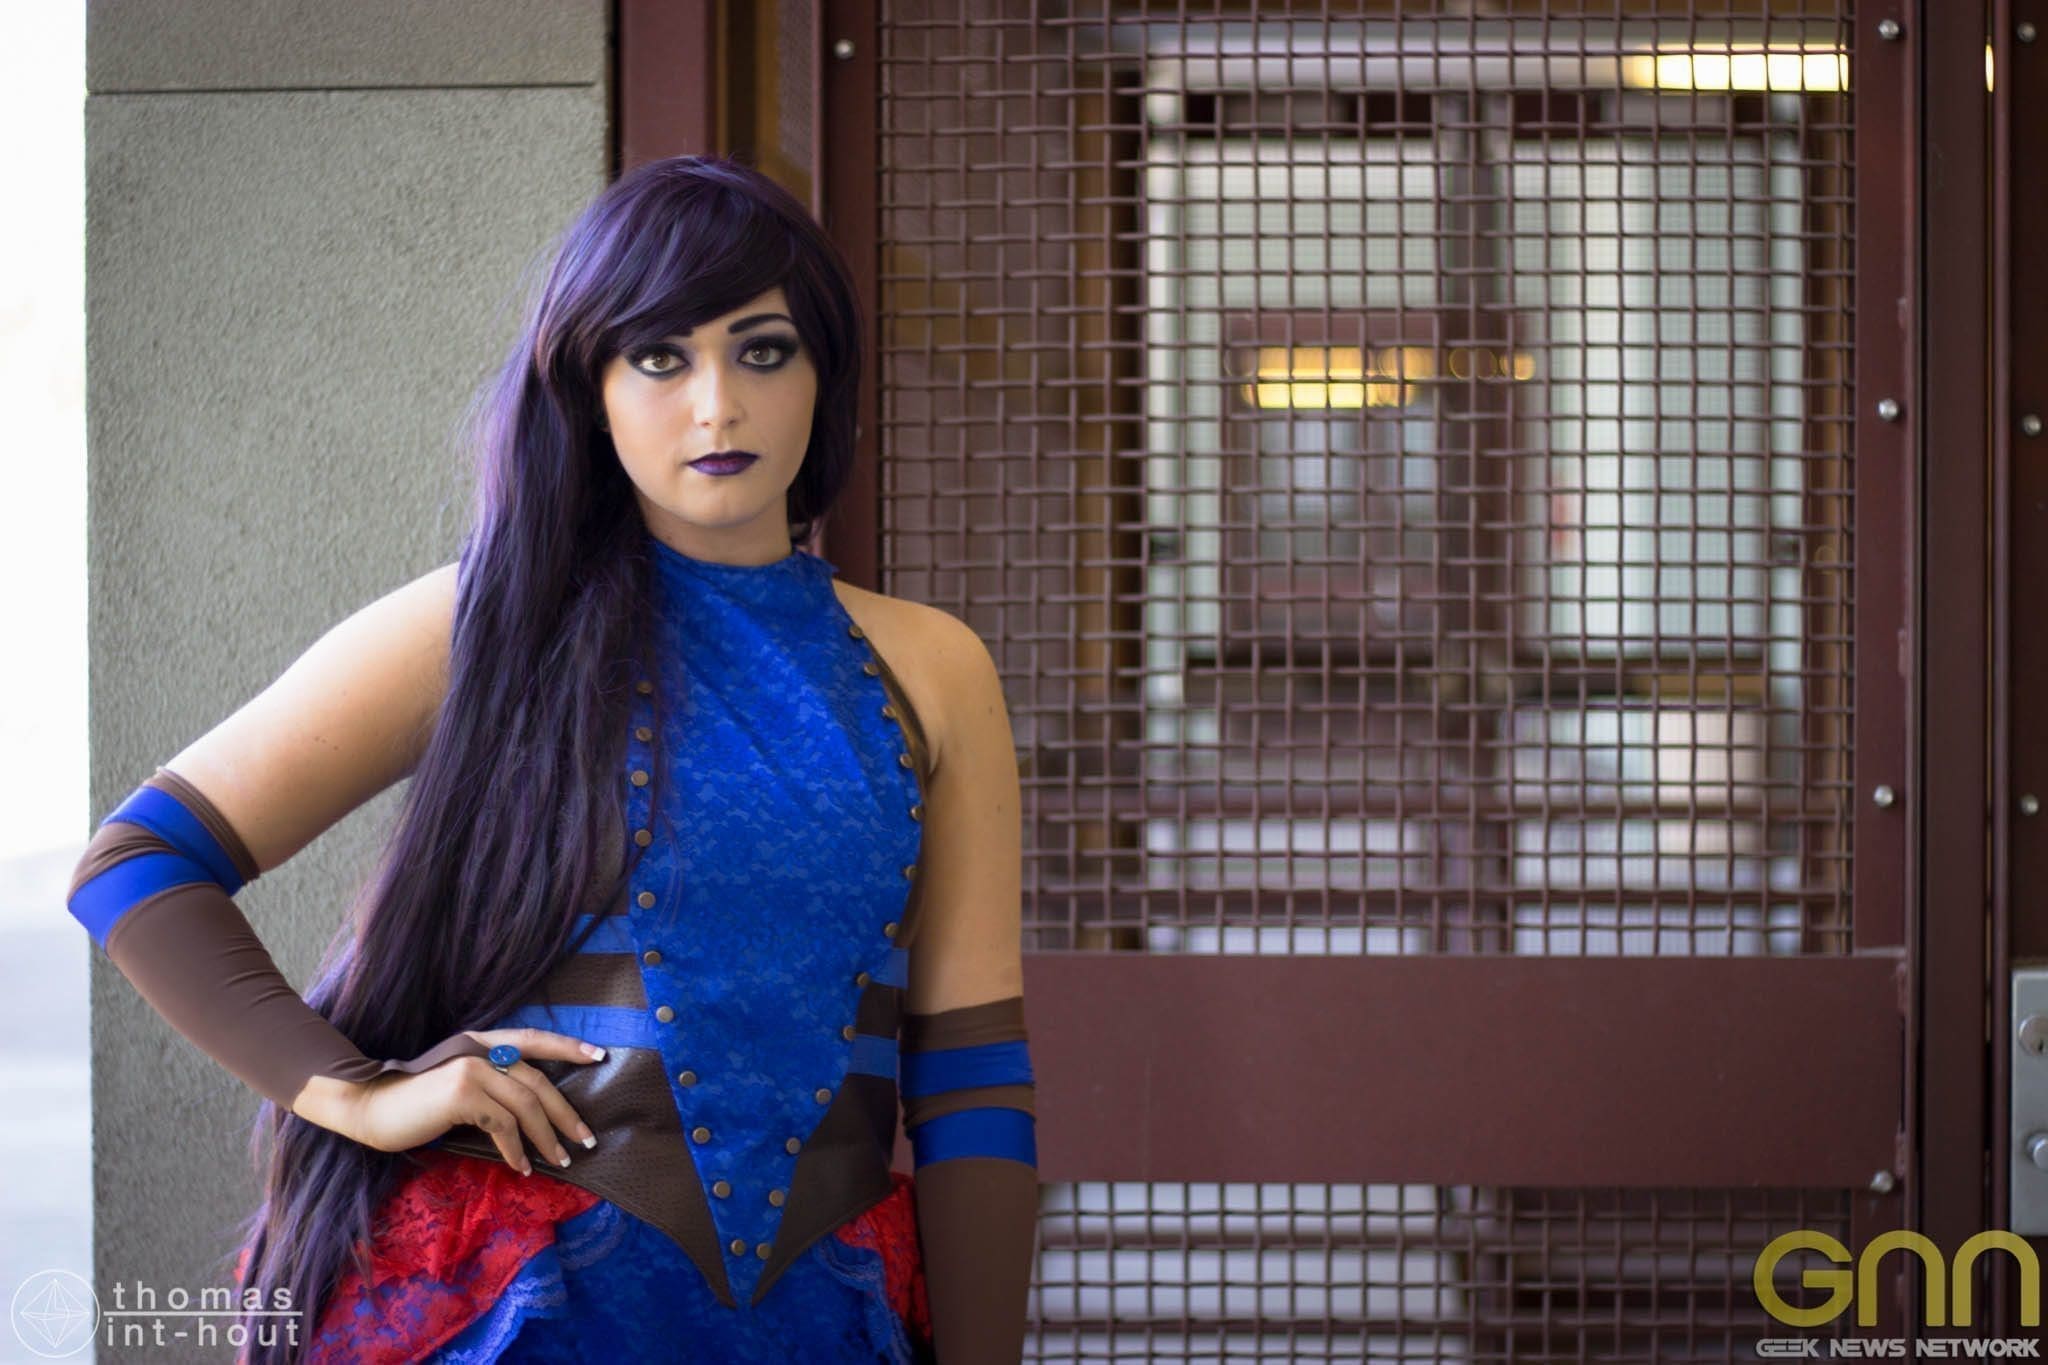 cosplay, featured cosplayer, Maise Design Seamstress, photoshoot